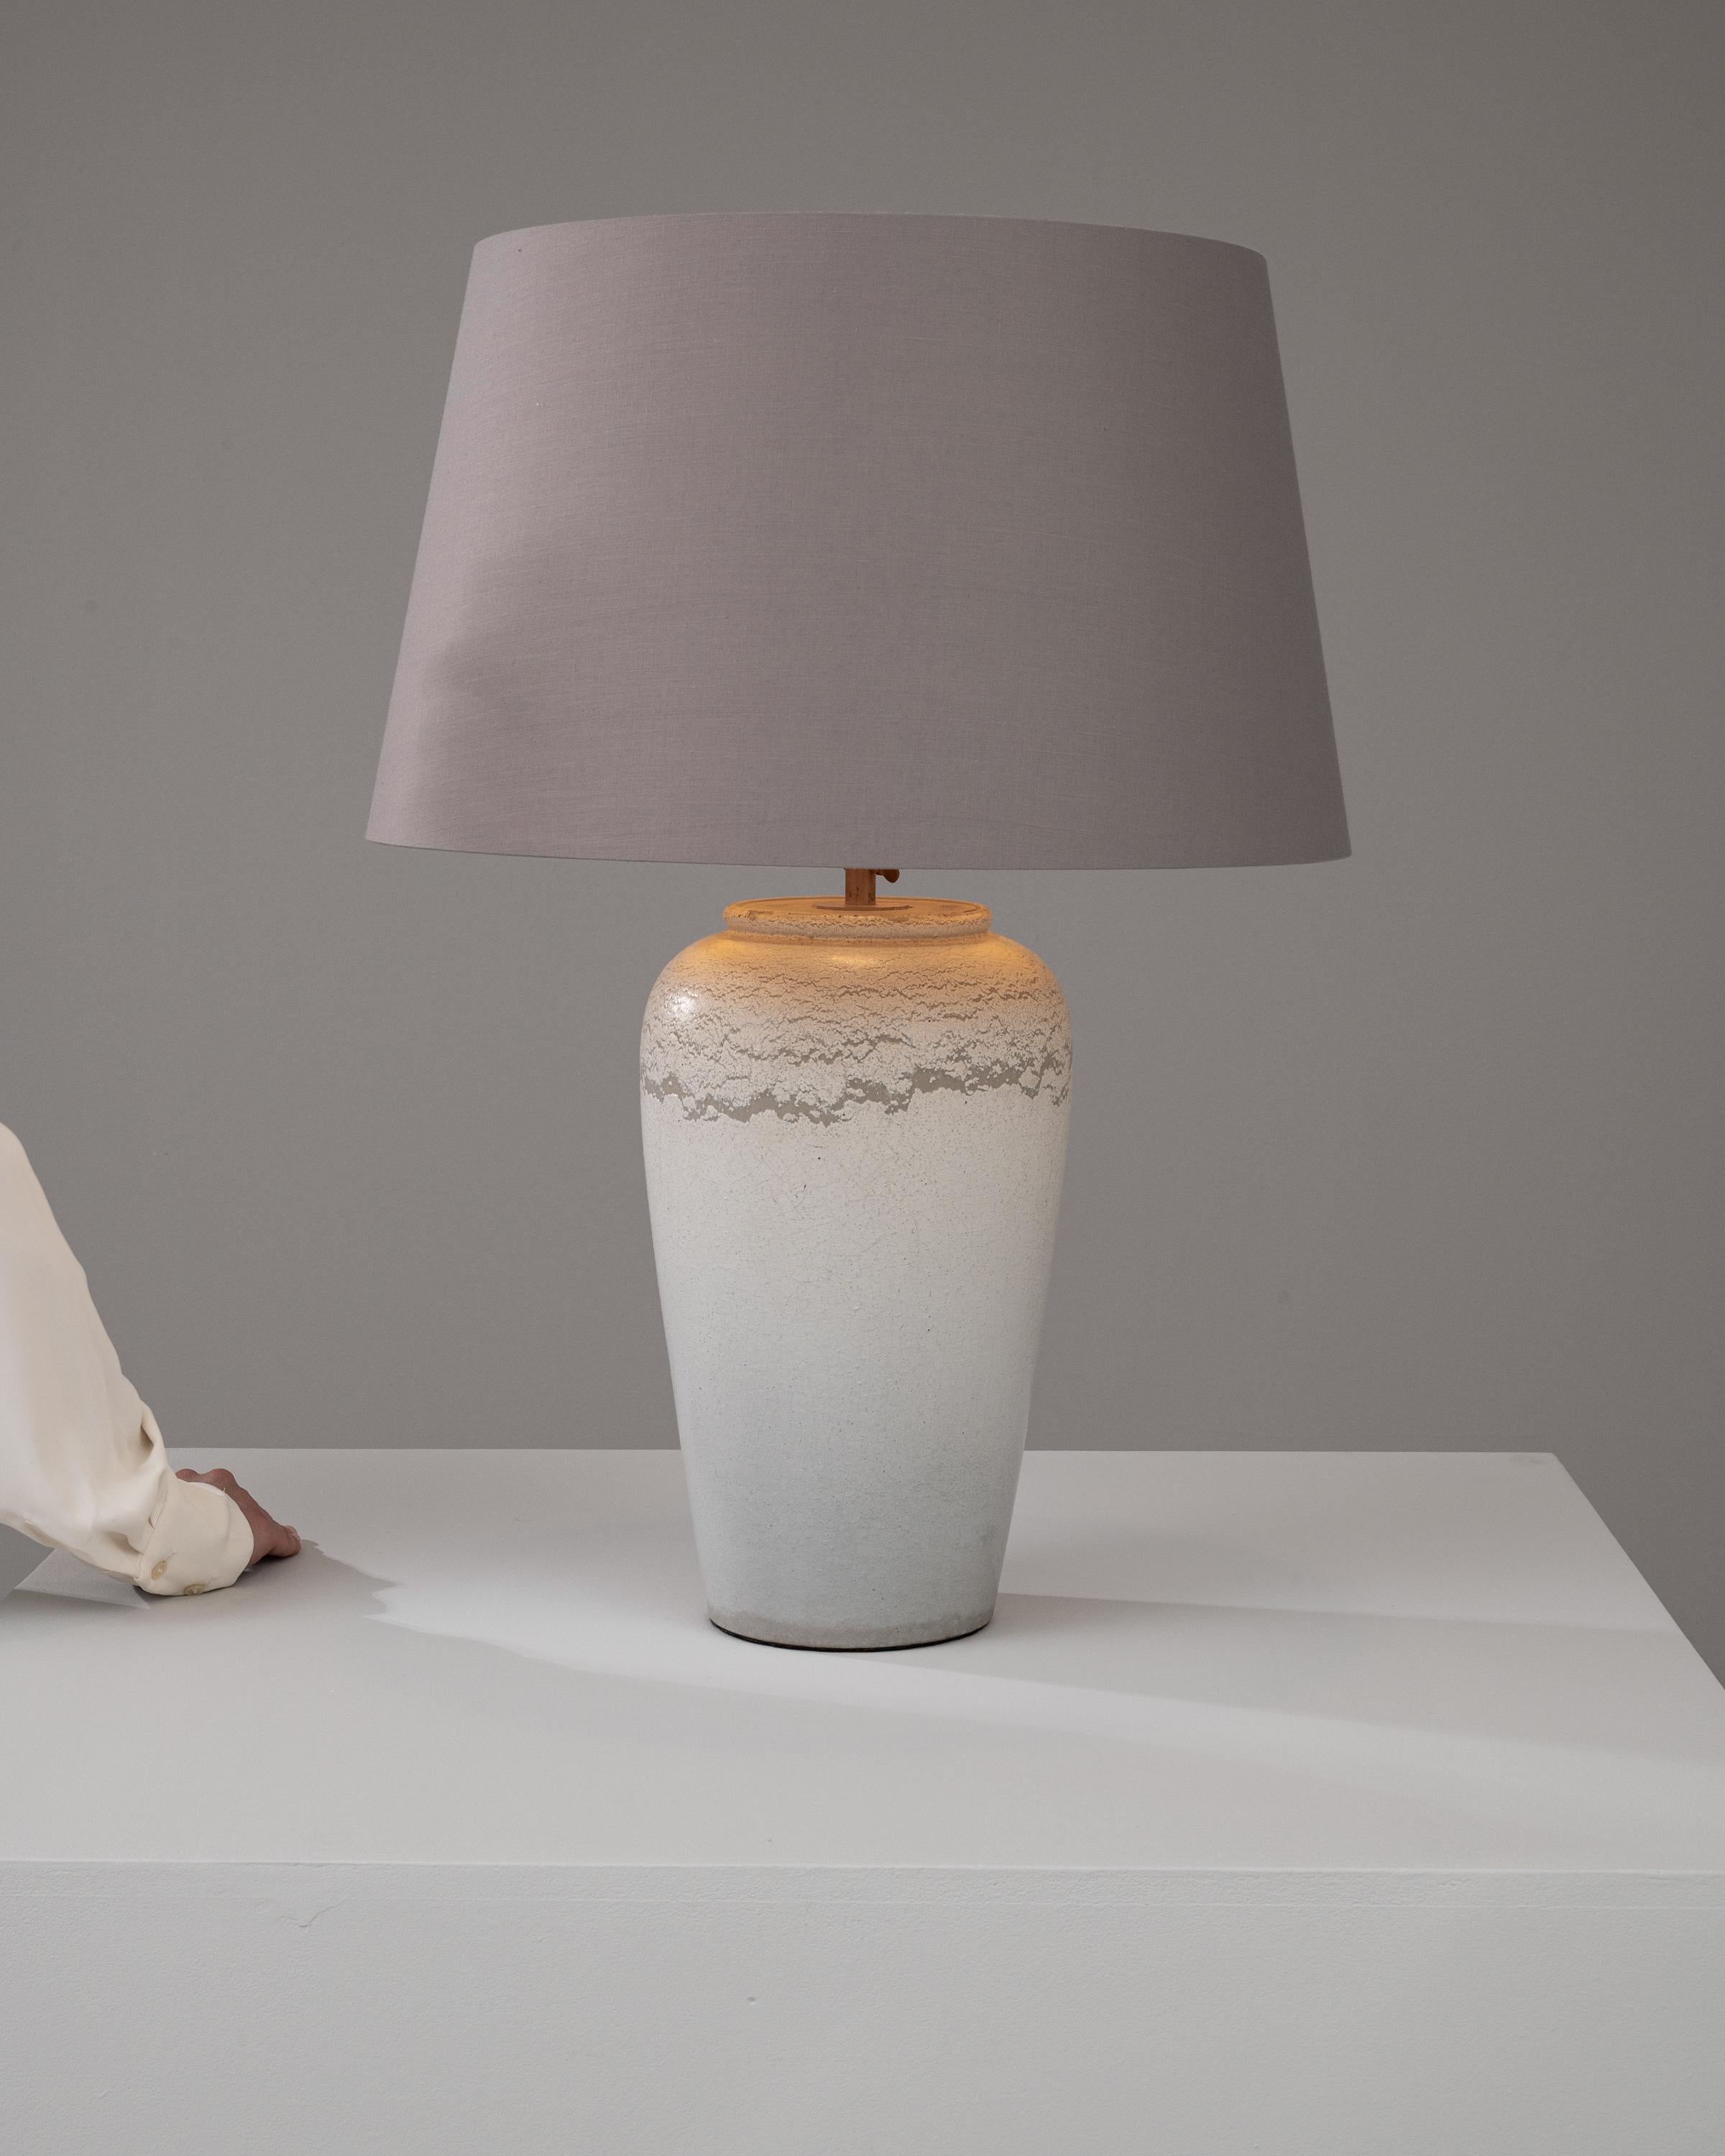 Illuminate your home with this exquisite 20th Century German Ceramic Table Lamp, a testament to timeless design and expert craftsmanship. The lamp’s body is a stunning study in contrasts, featuring a textured, frosted ceramic finish that beautifully